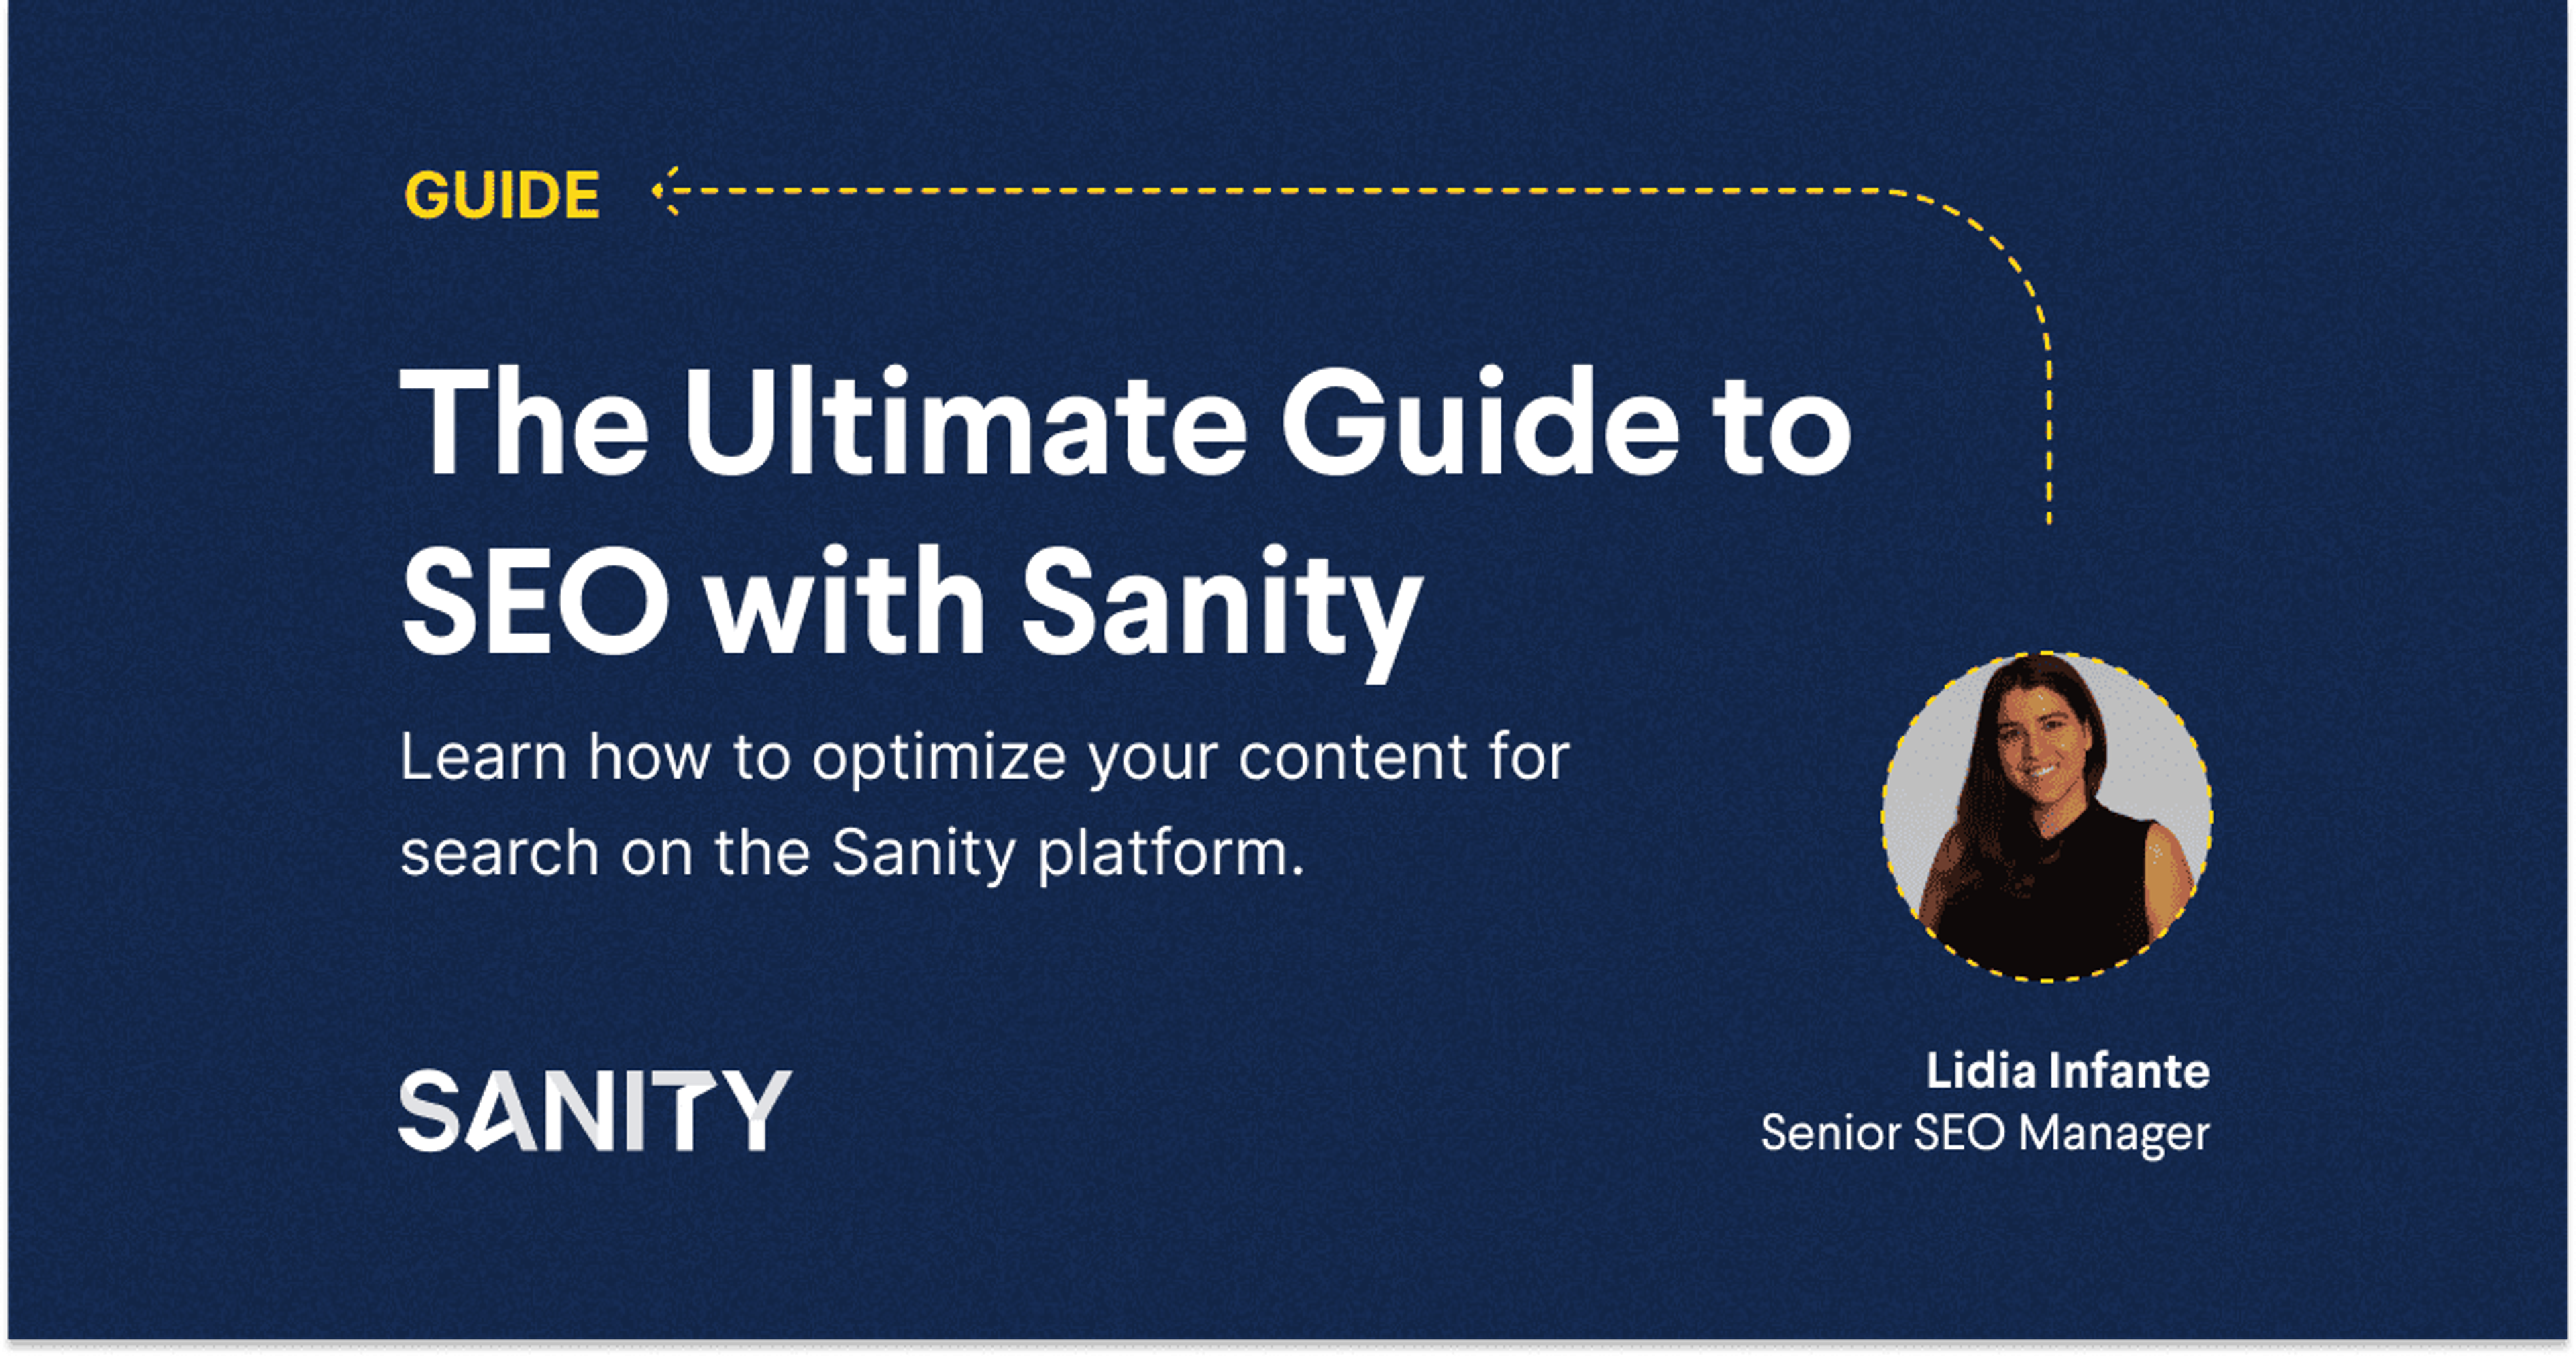 The Ultimate Guide to SEO with Sanity